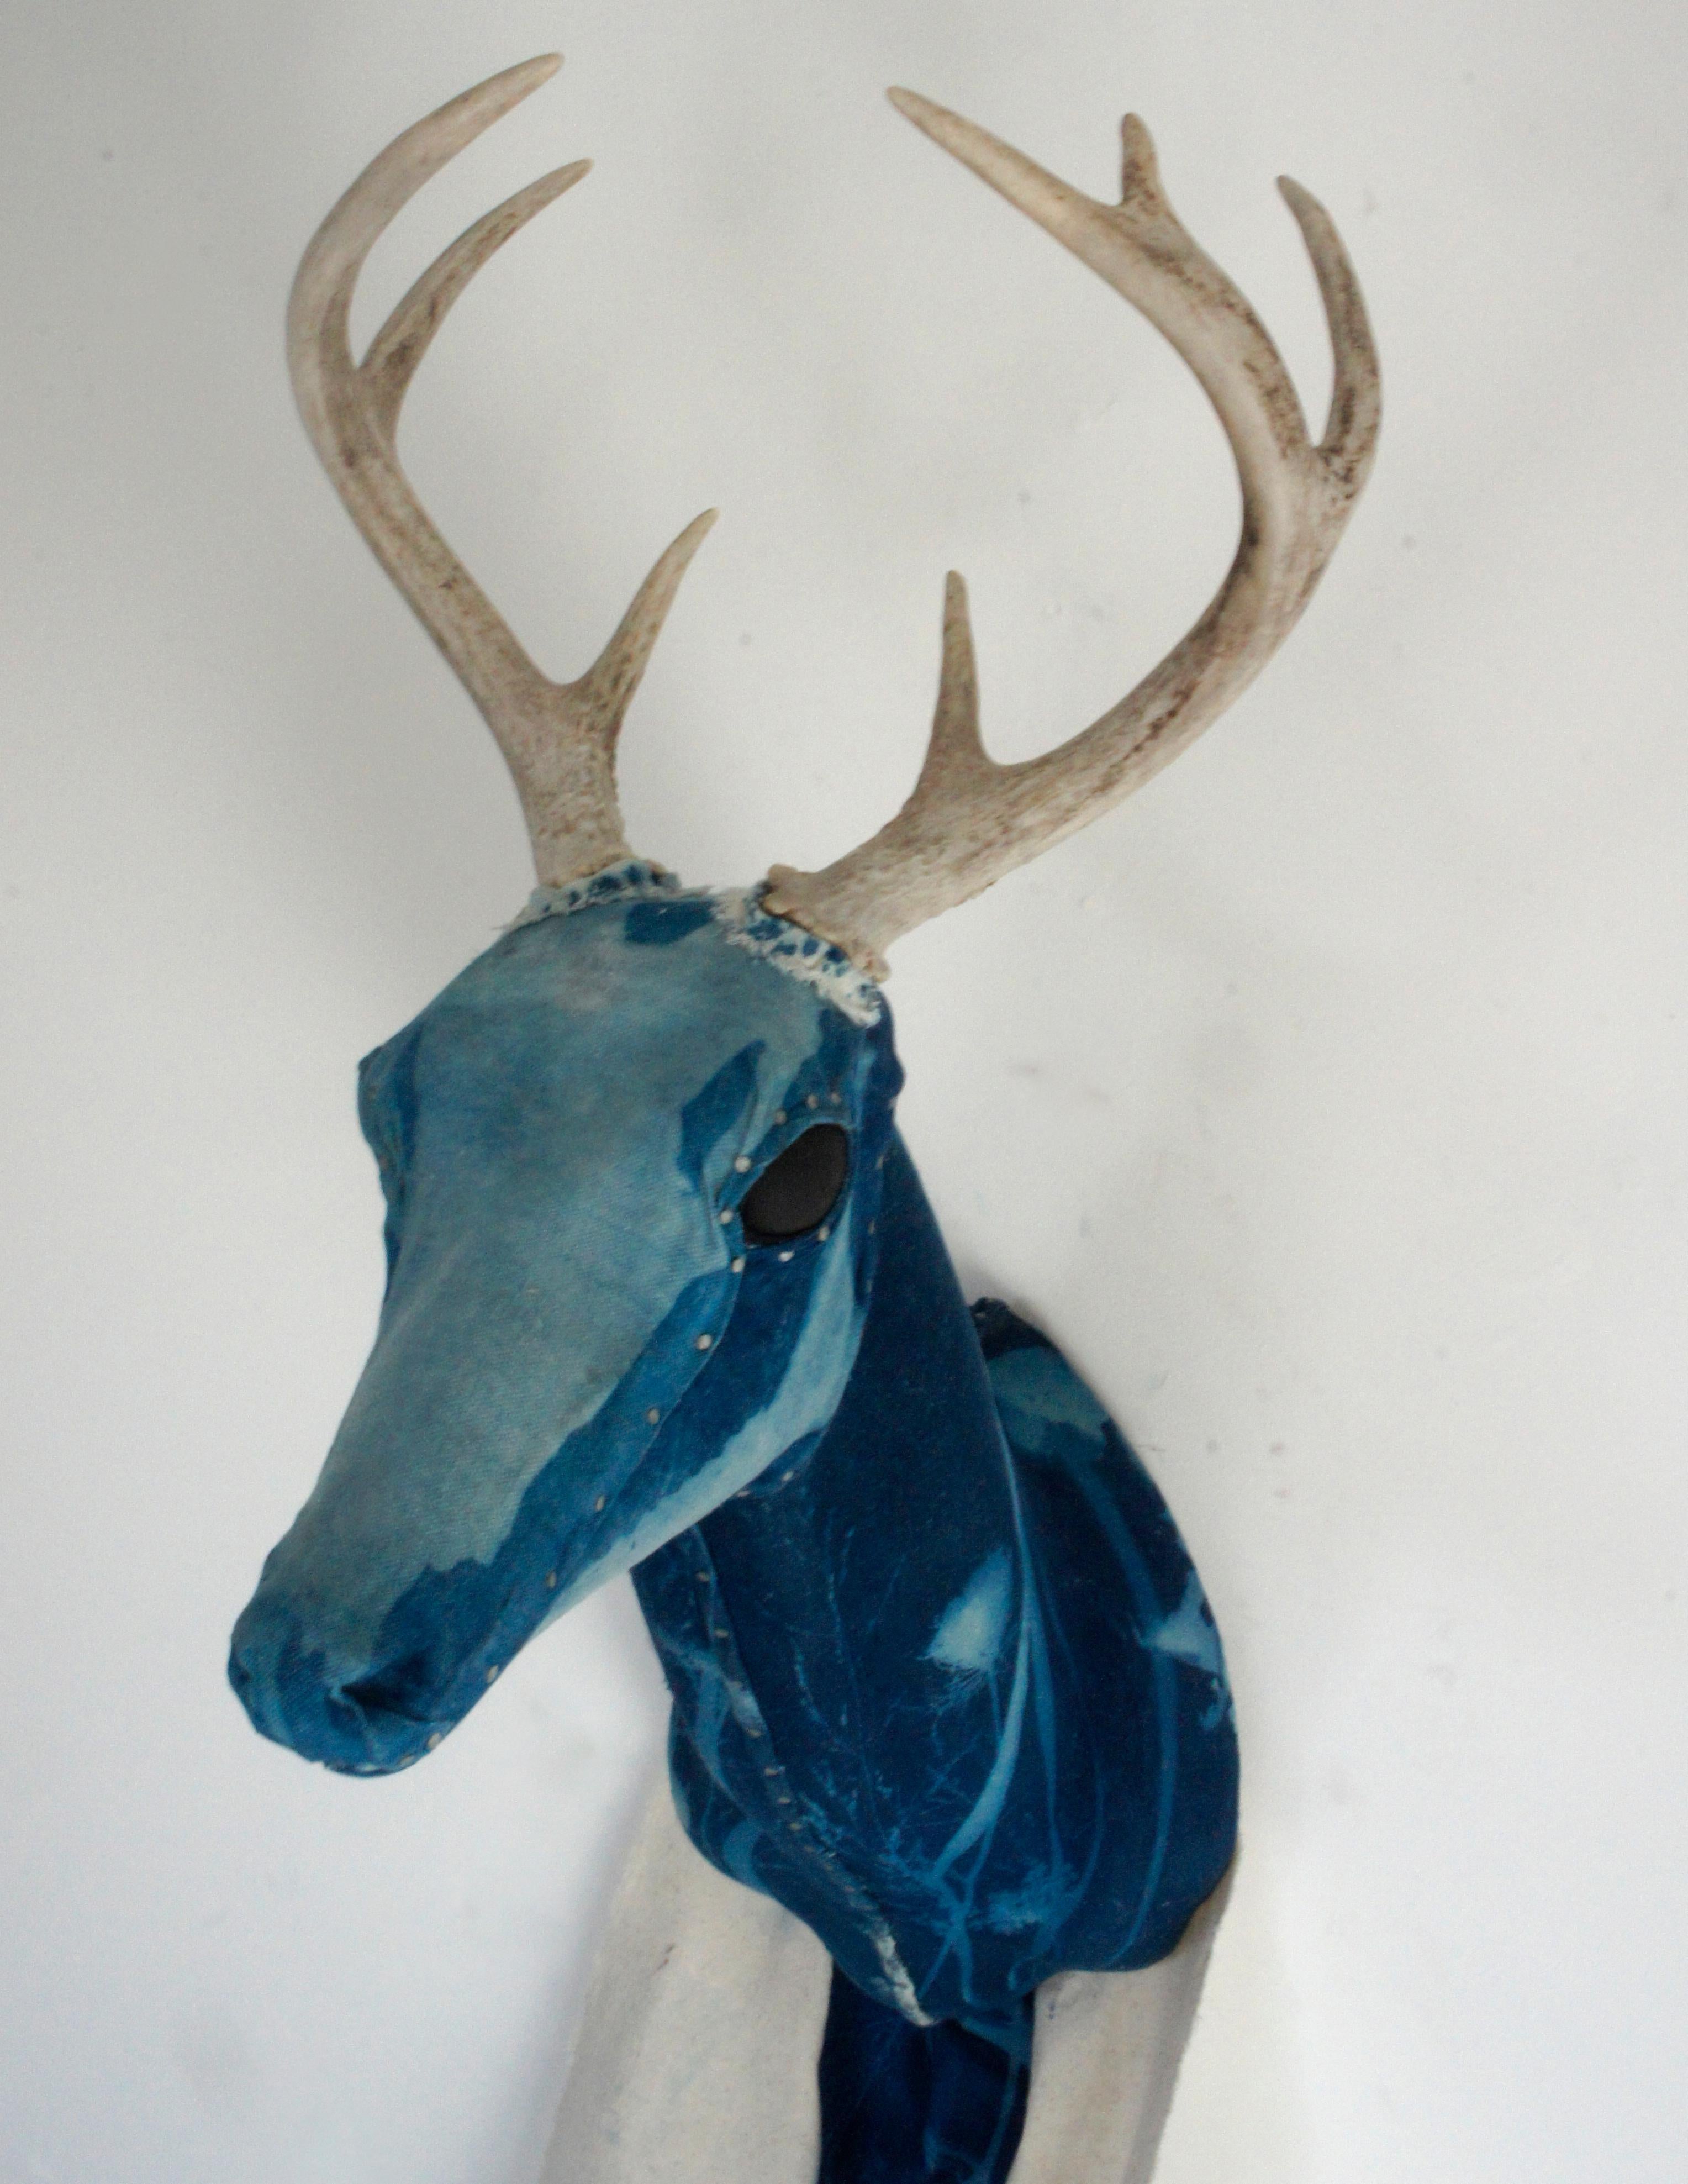 Large Stag Head Sculpture: 'A Remembrance' - Gray Figurative Sculpture by Gin Stone